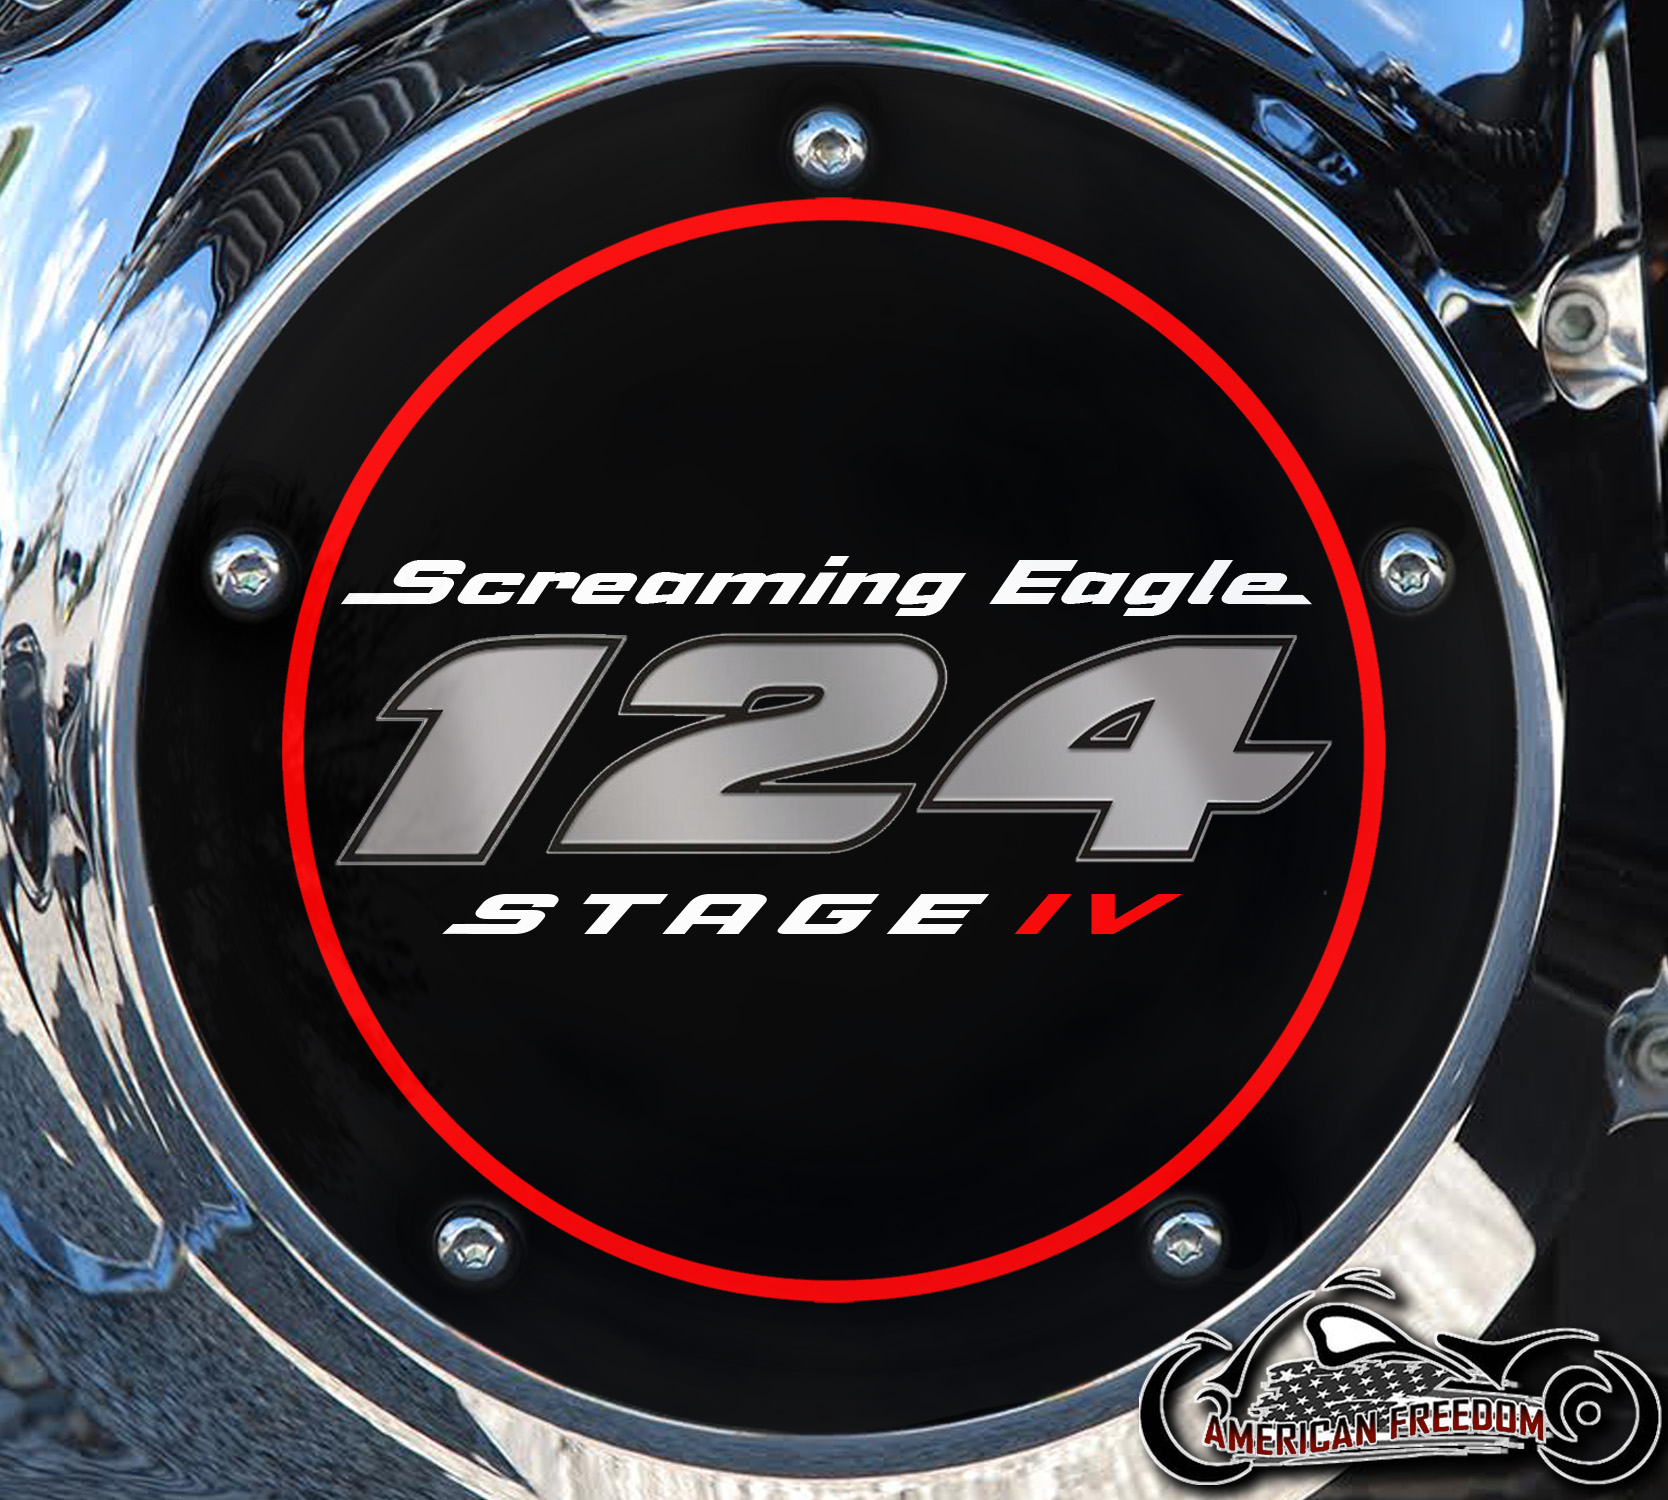 Screaming Eagle Stage IV 124 Derby Cover O/L